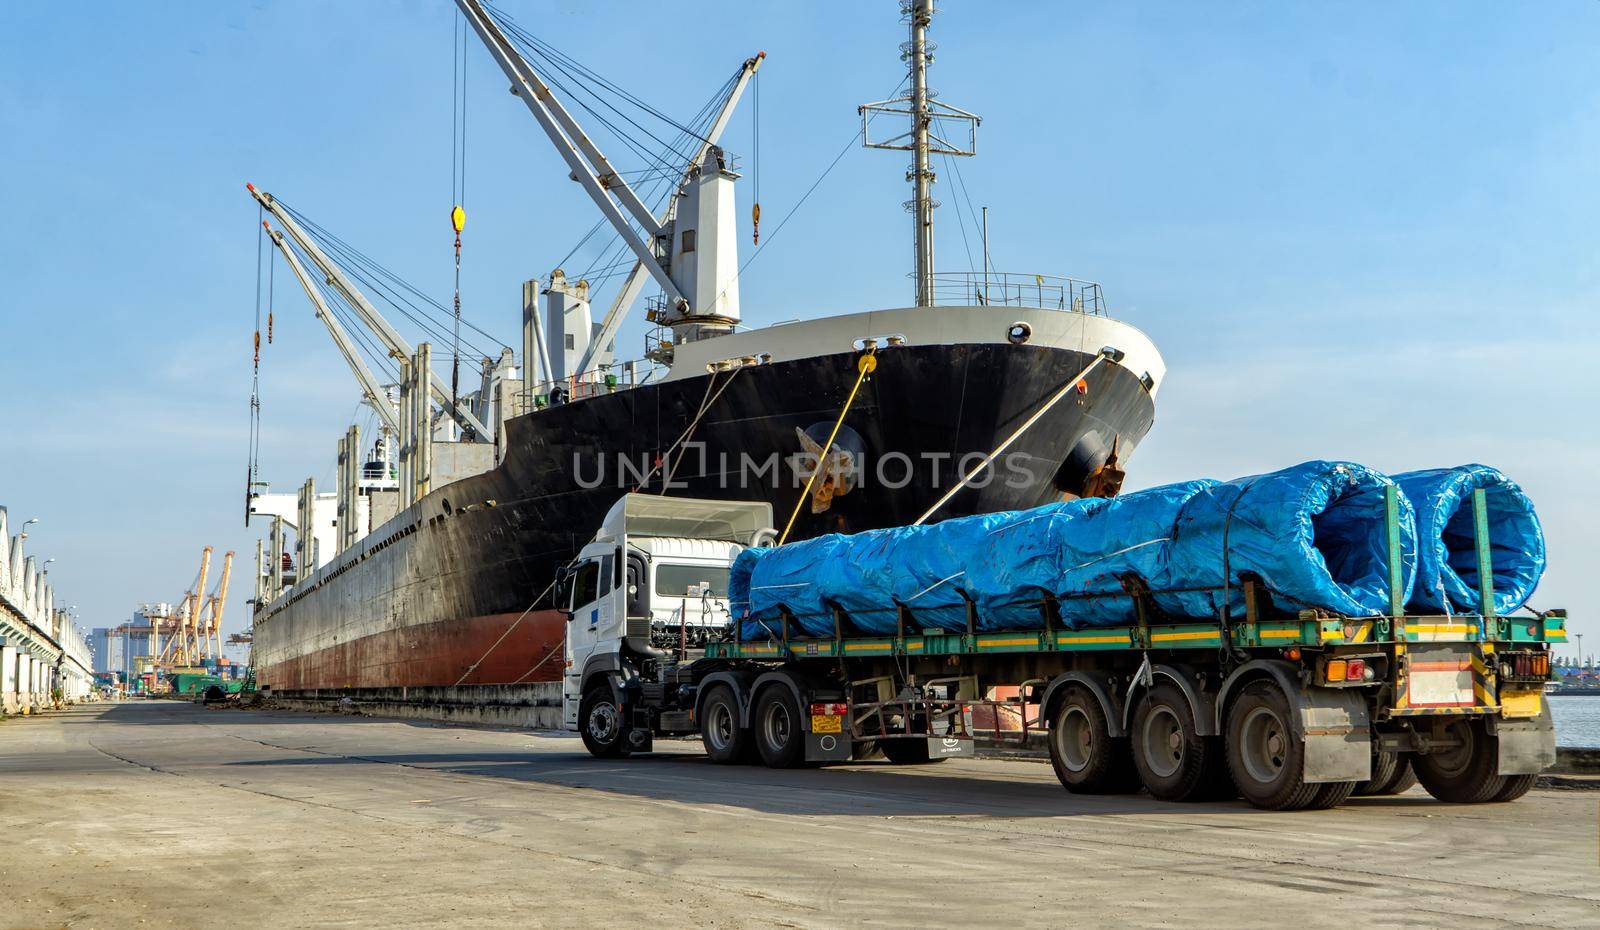 Logistics and transportation of Container Cargo ship and Cargo plane with working crane bridge in shipyard at sunrise, logistic import export and transport industry background by chuanchai